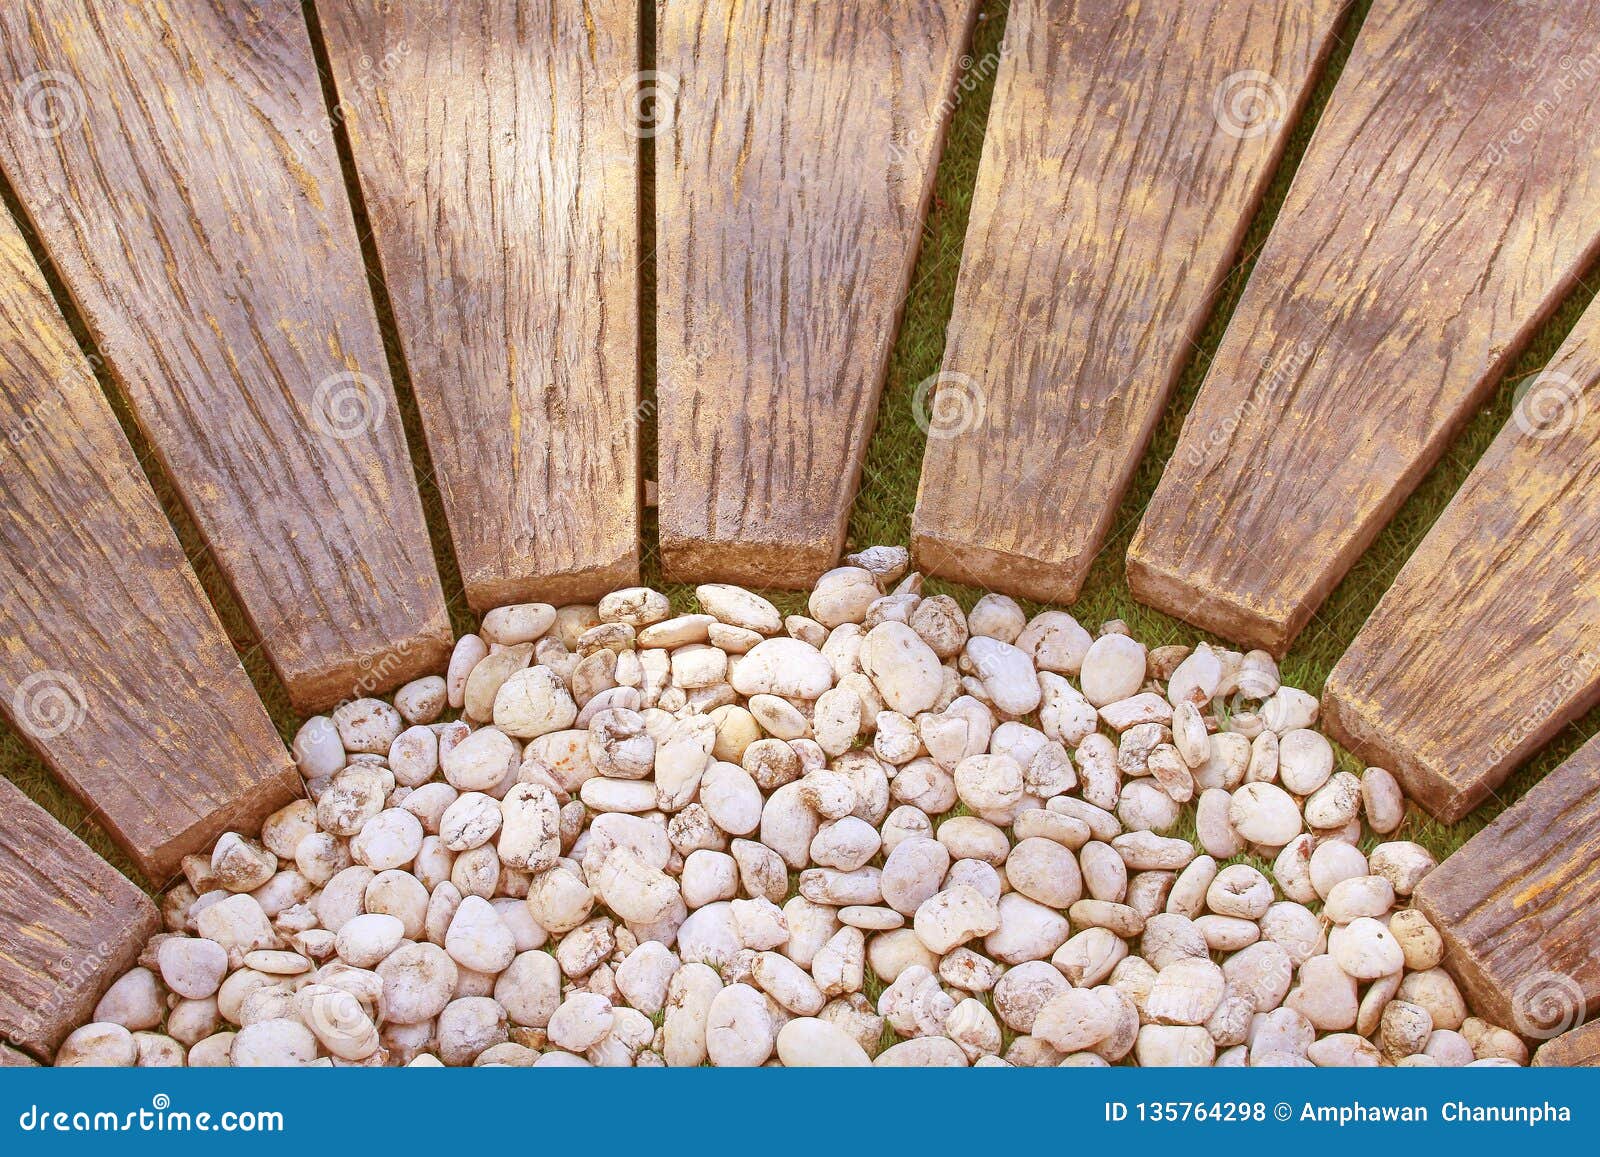 Brown Wood Walkway With White Small Rocks Pattern In The Garden